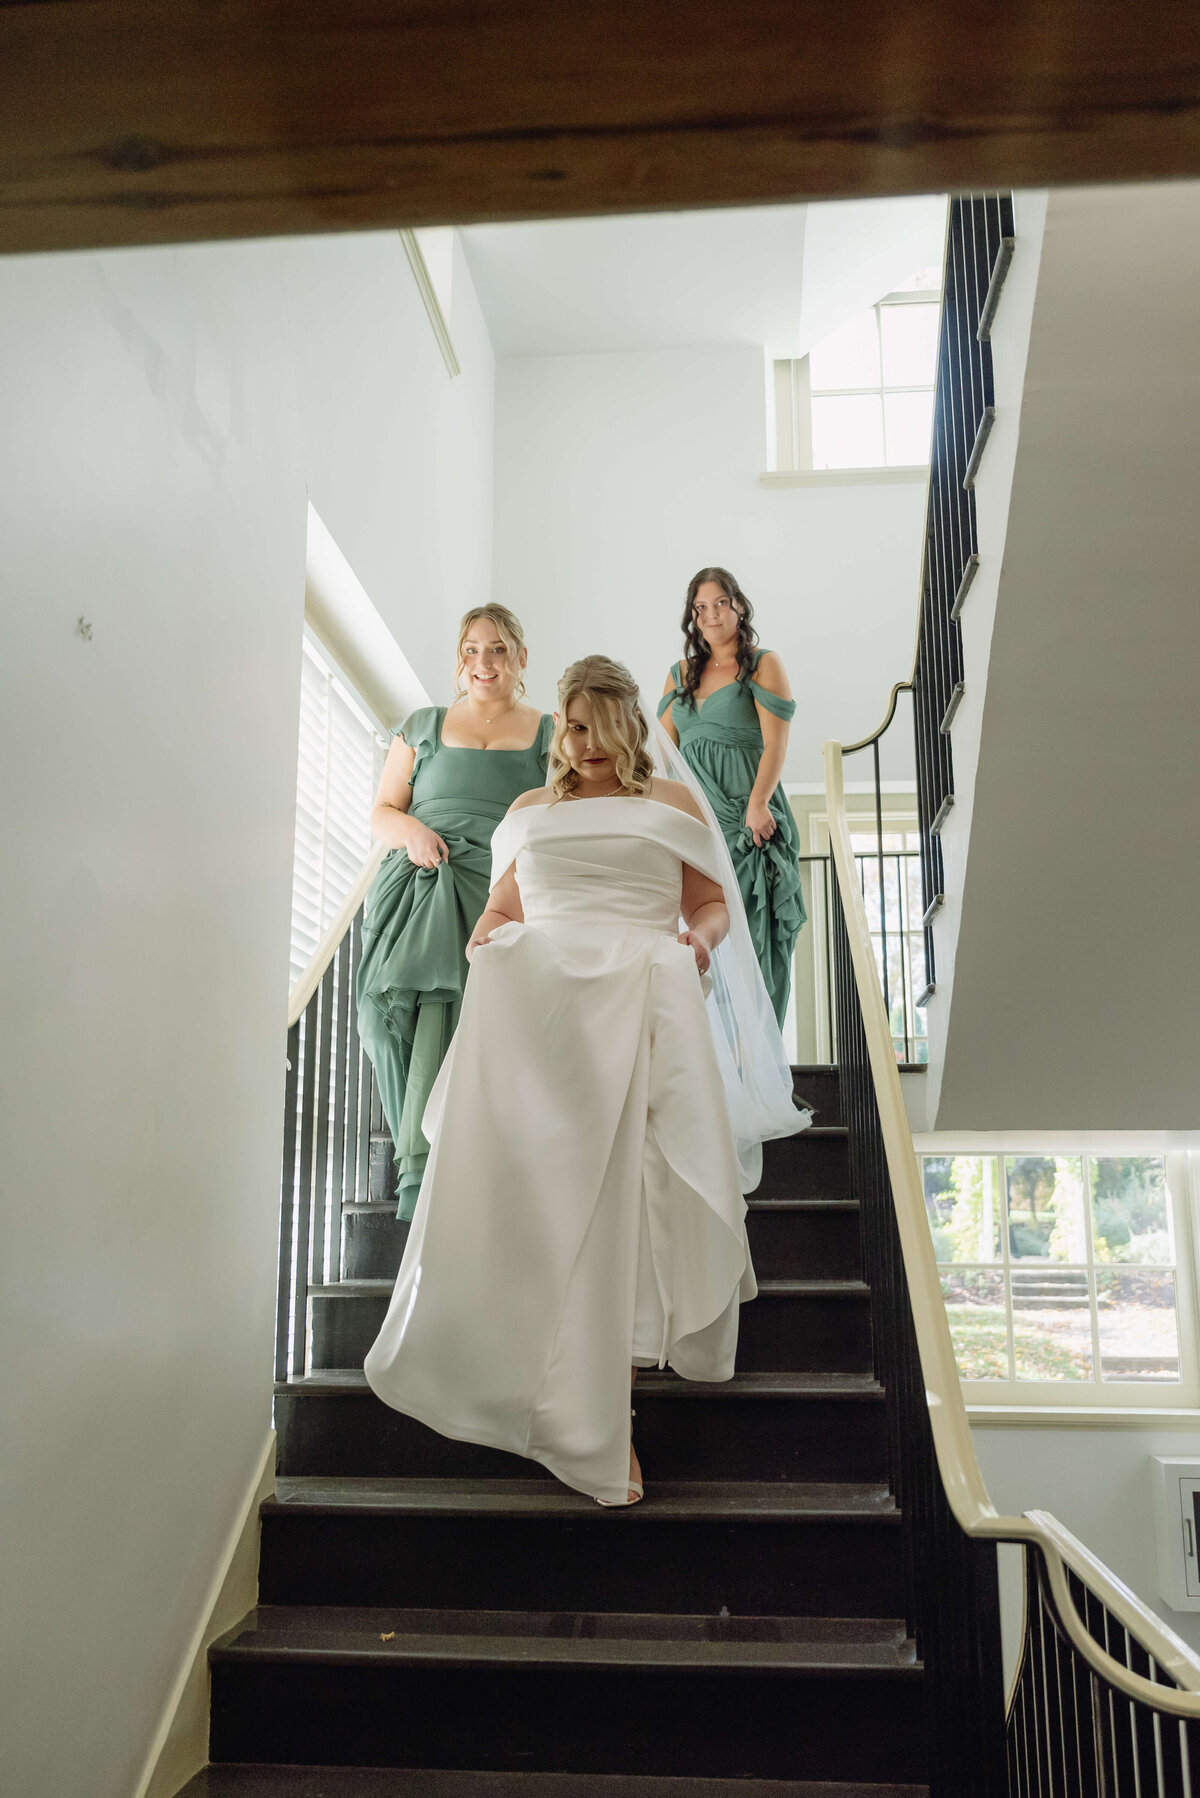 bridesmaids help the bride walk down a stair case from her bridal suite with the bridesmaids in sage green bridesmaids dresses holding the brides train